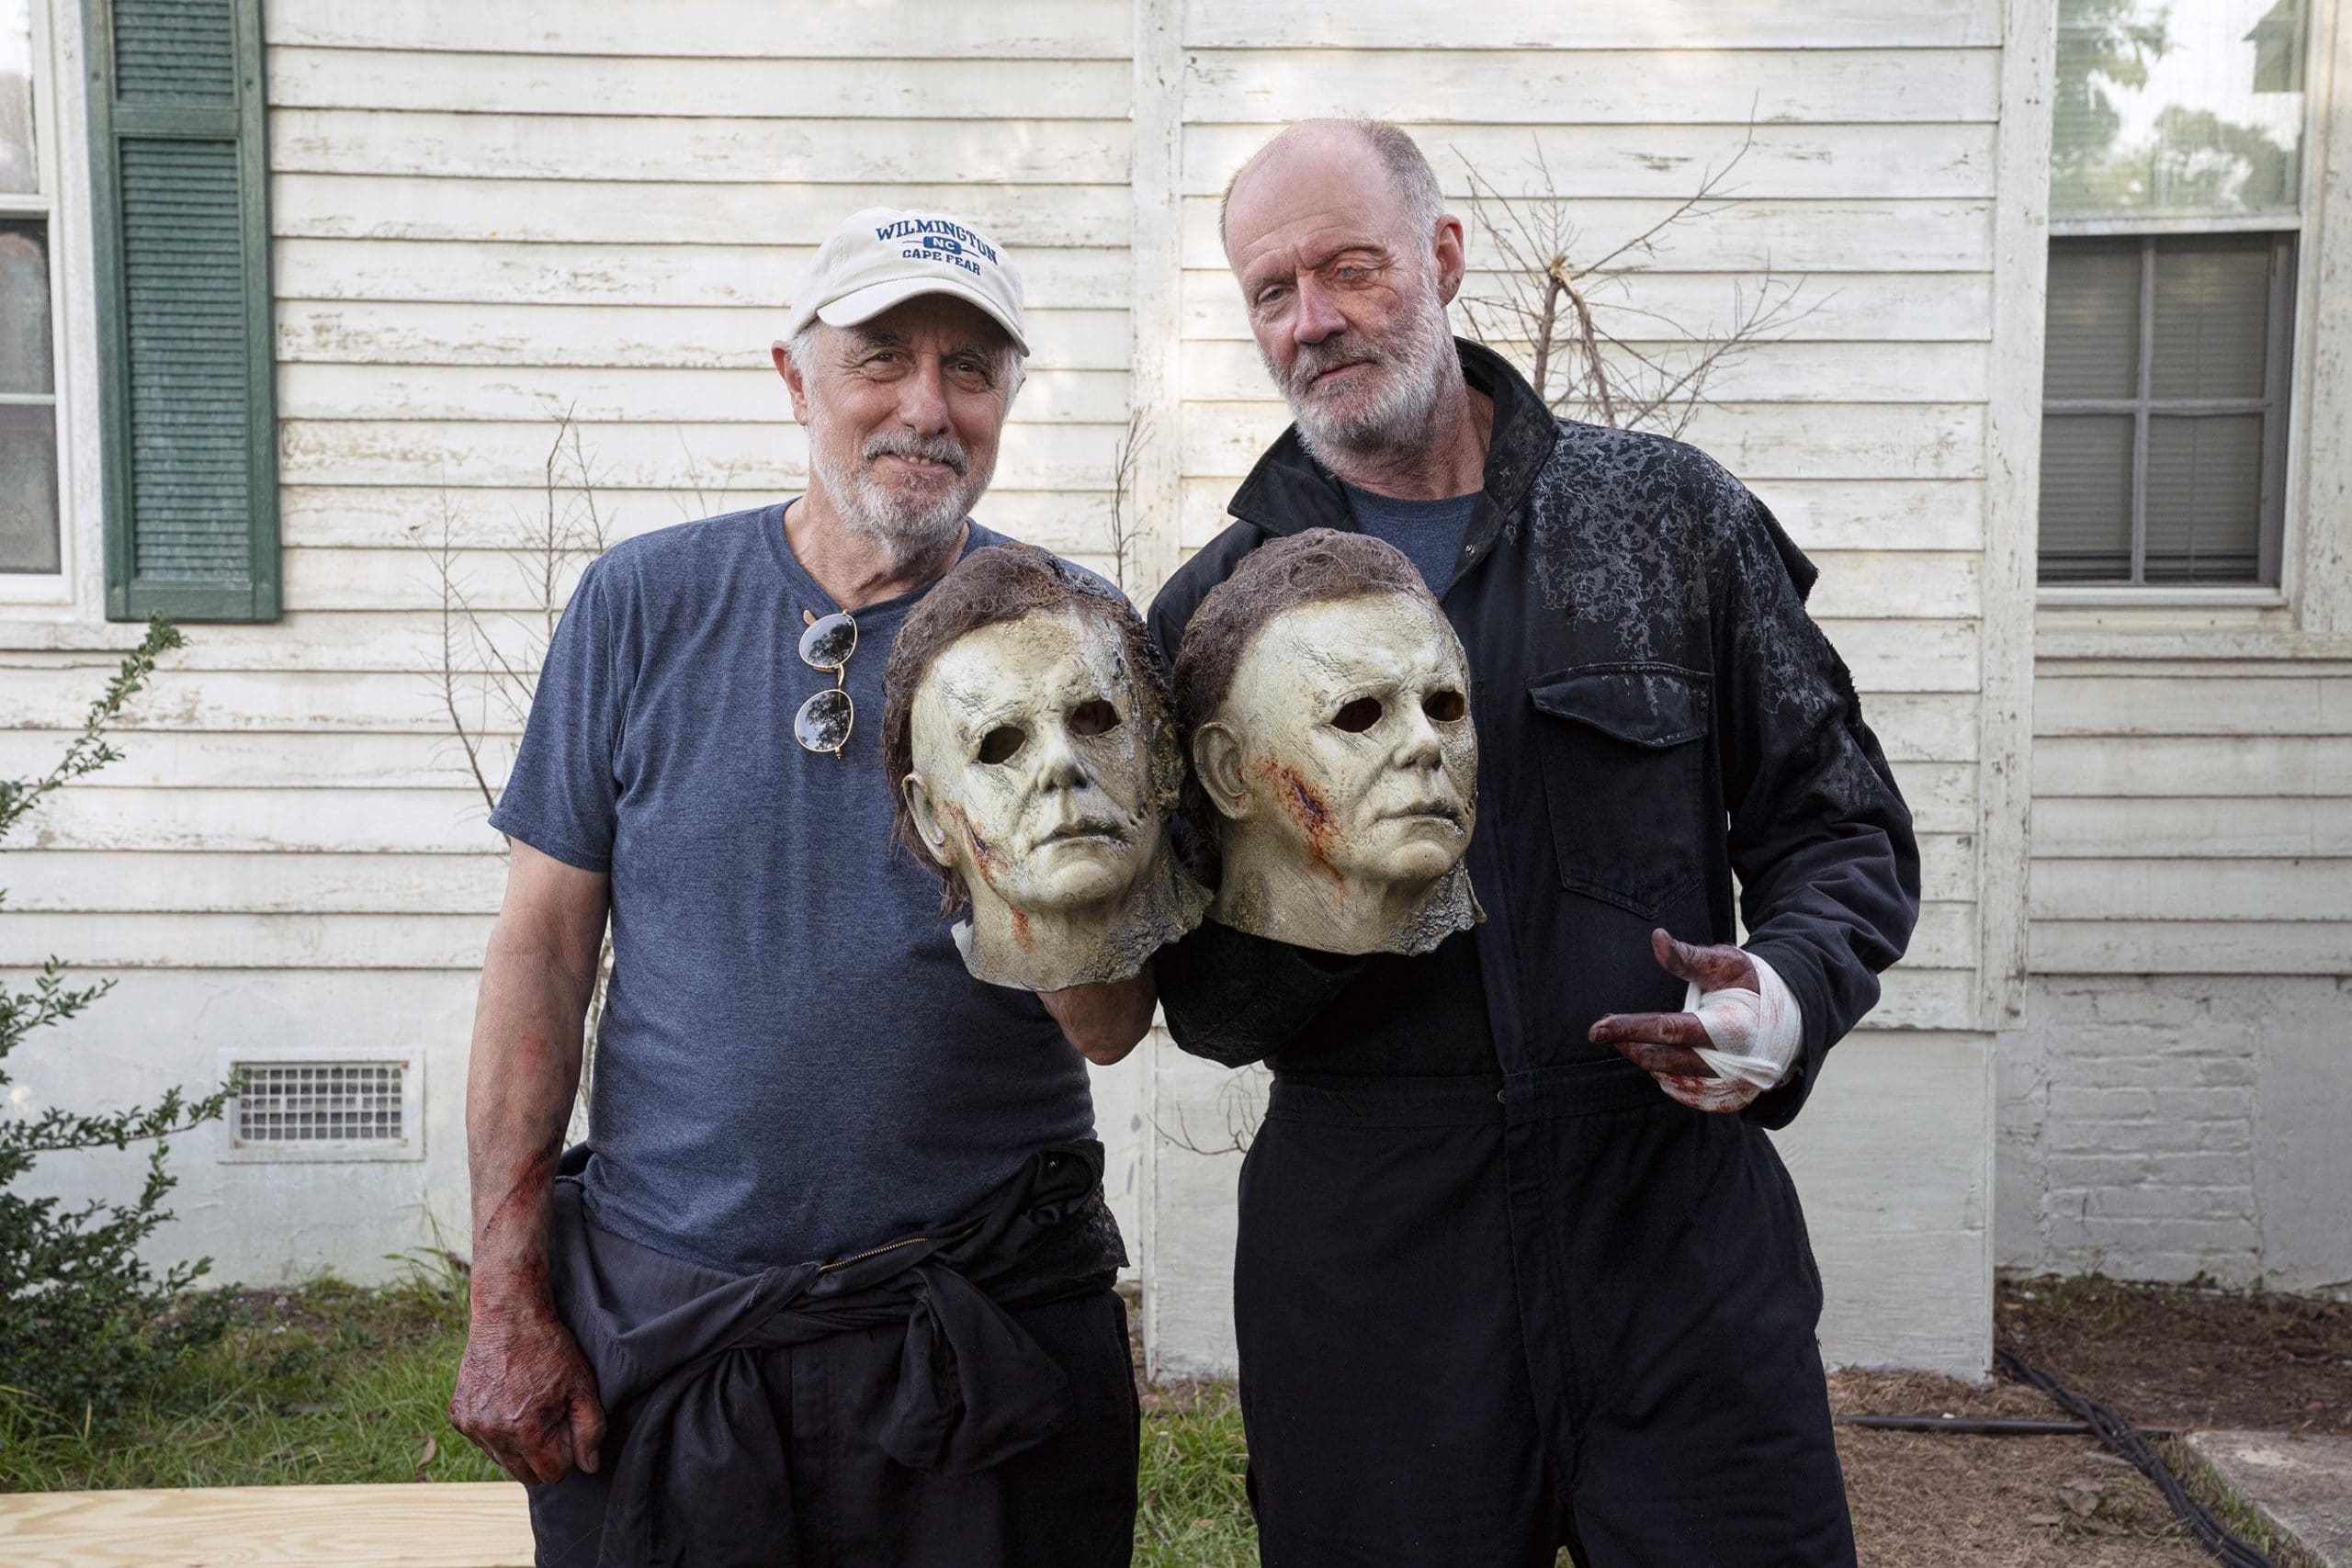 HALLOWEEN KILLS, from left: Nick Castle, James Jude Courtney, who both perform as 'the shape' / Michael Myers, on set, 2021